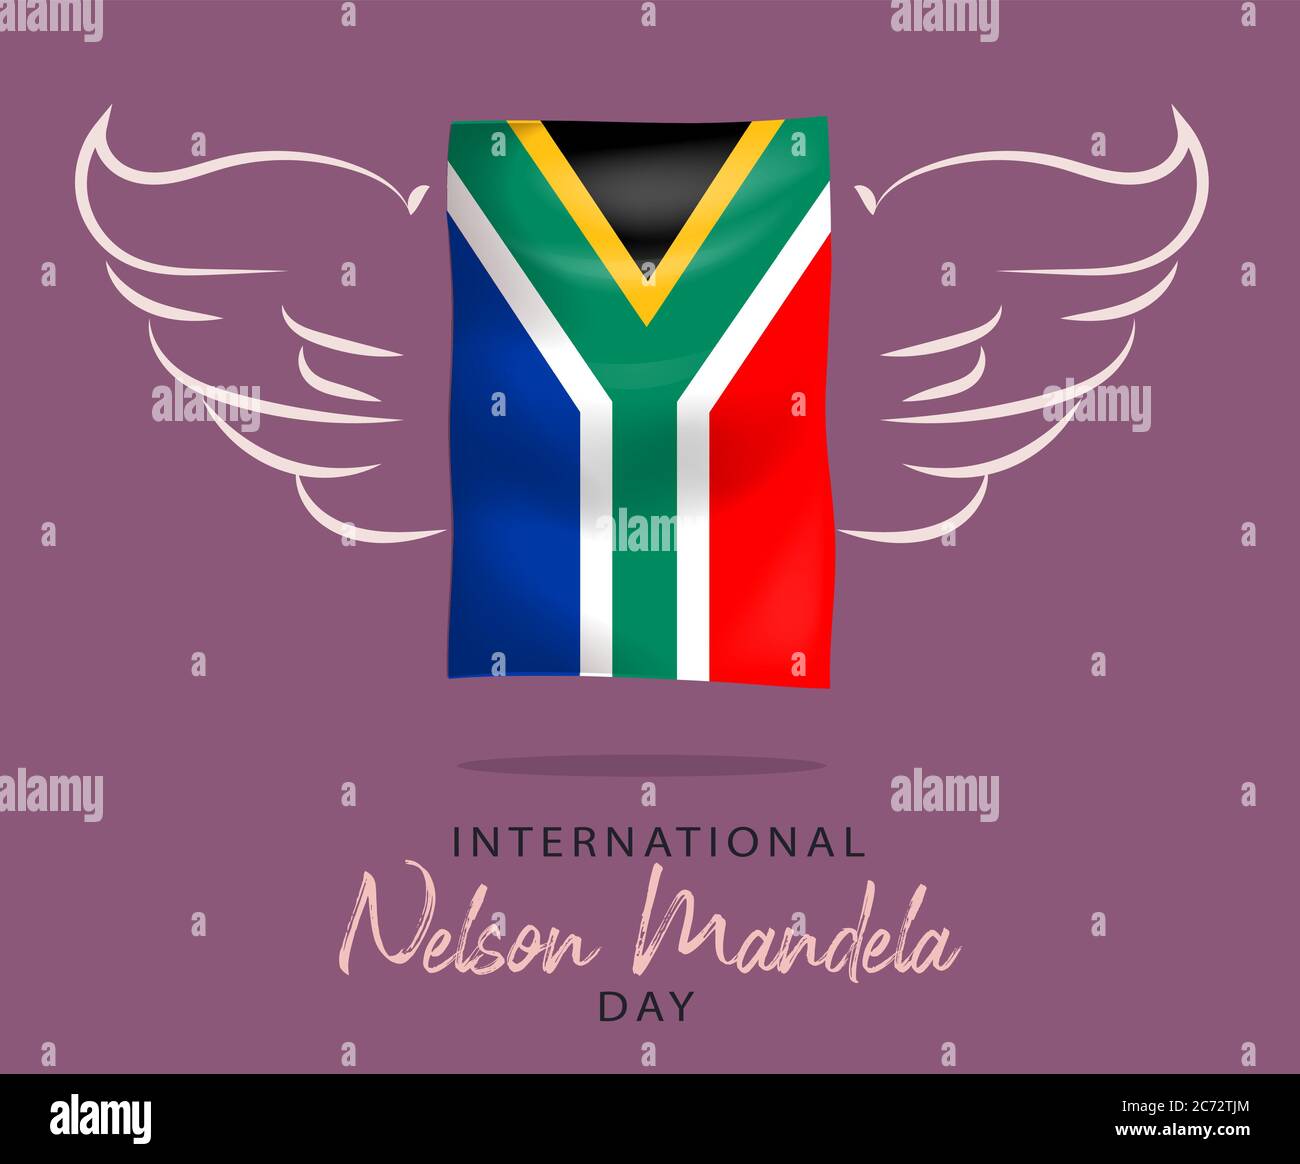 International Nelson Mandela Day, 18th July, African flag with dove bird wings, poster, illustration vector Stock Vector